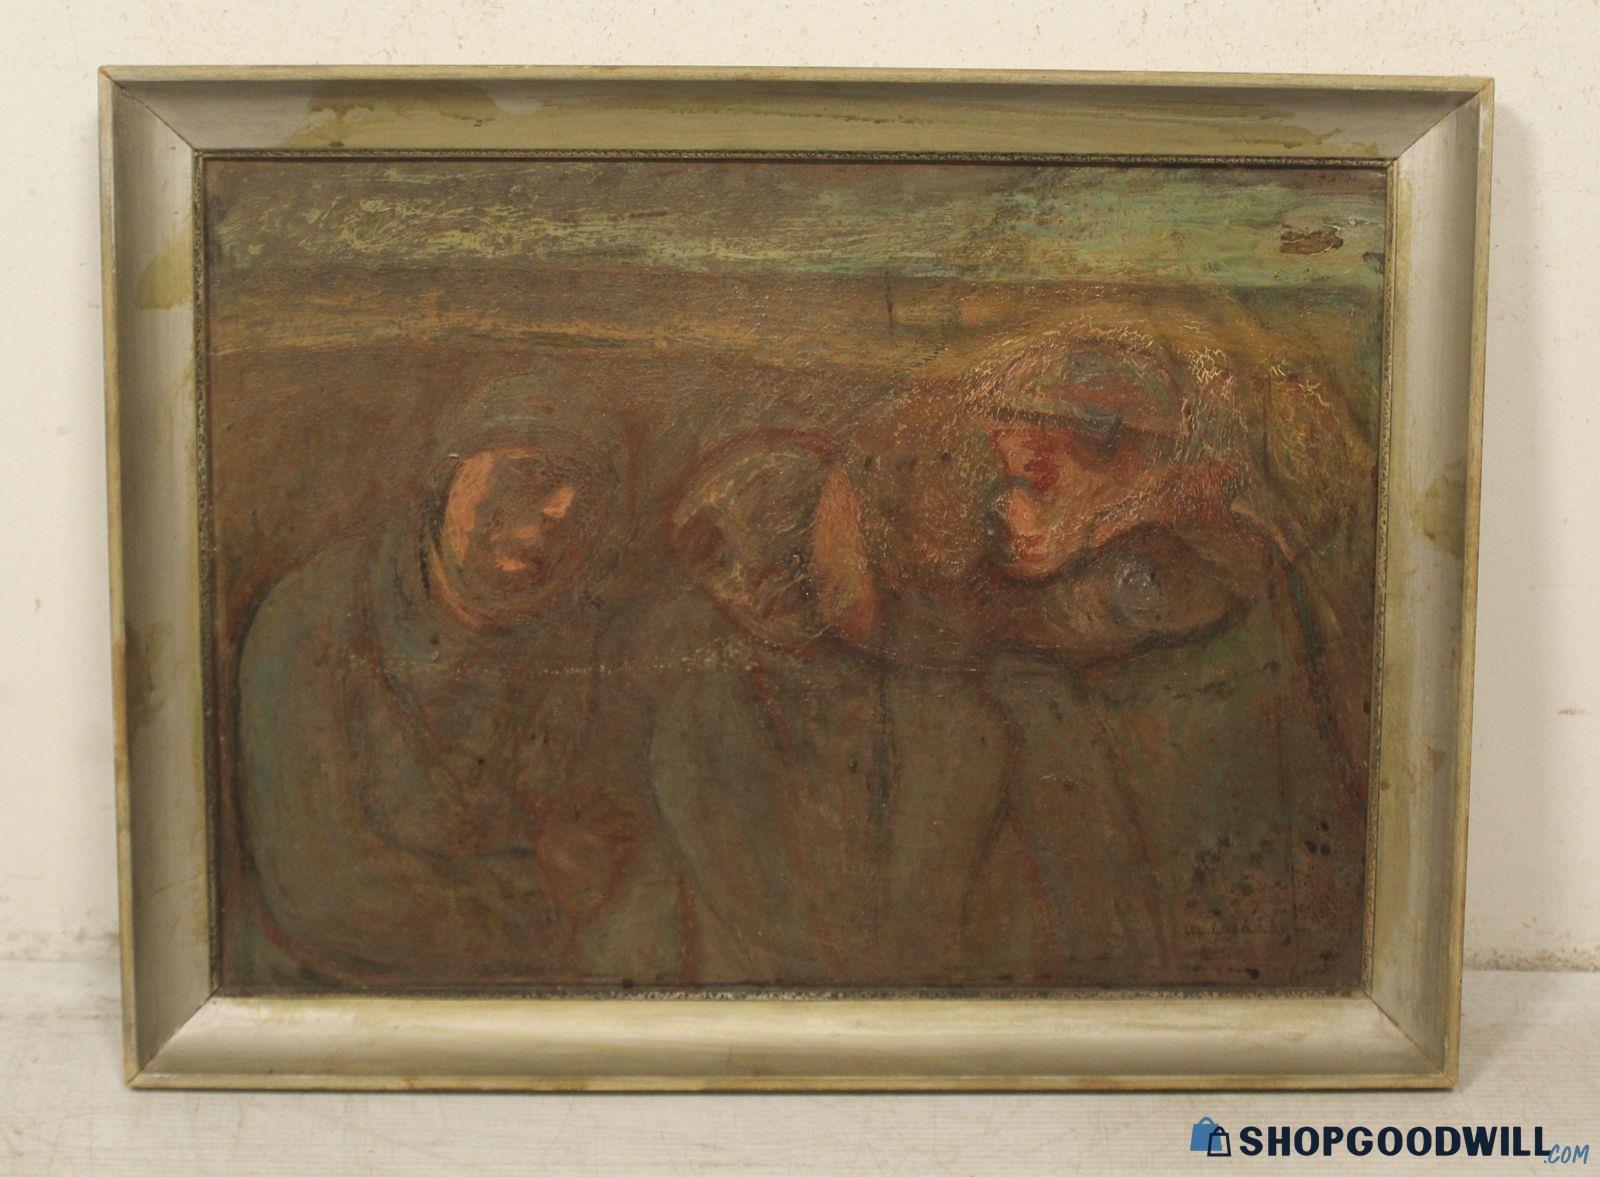 An old painting depicts three vague, abstract figures in earthy tones, framed in a simple metallic frame.